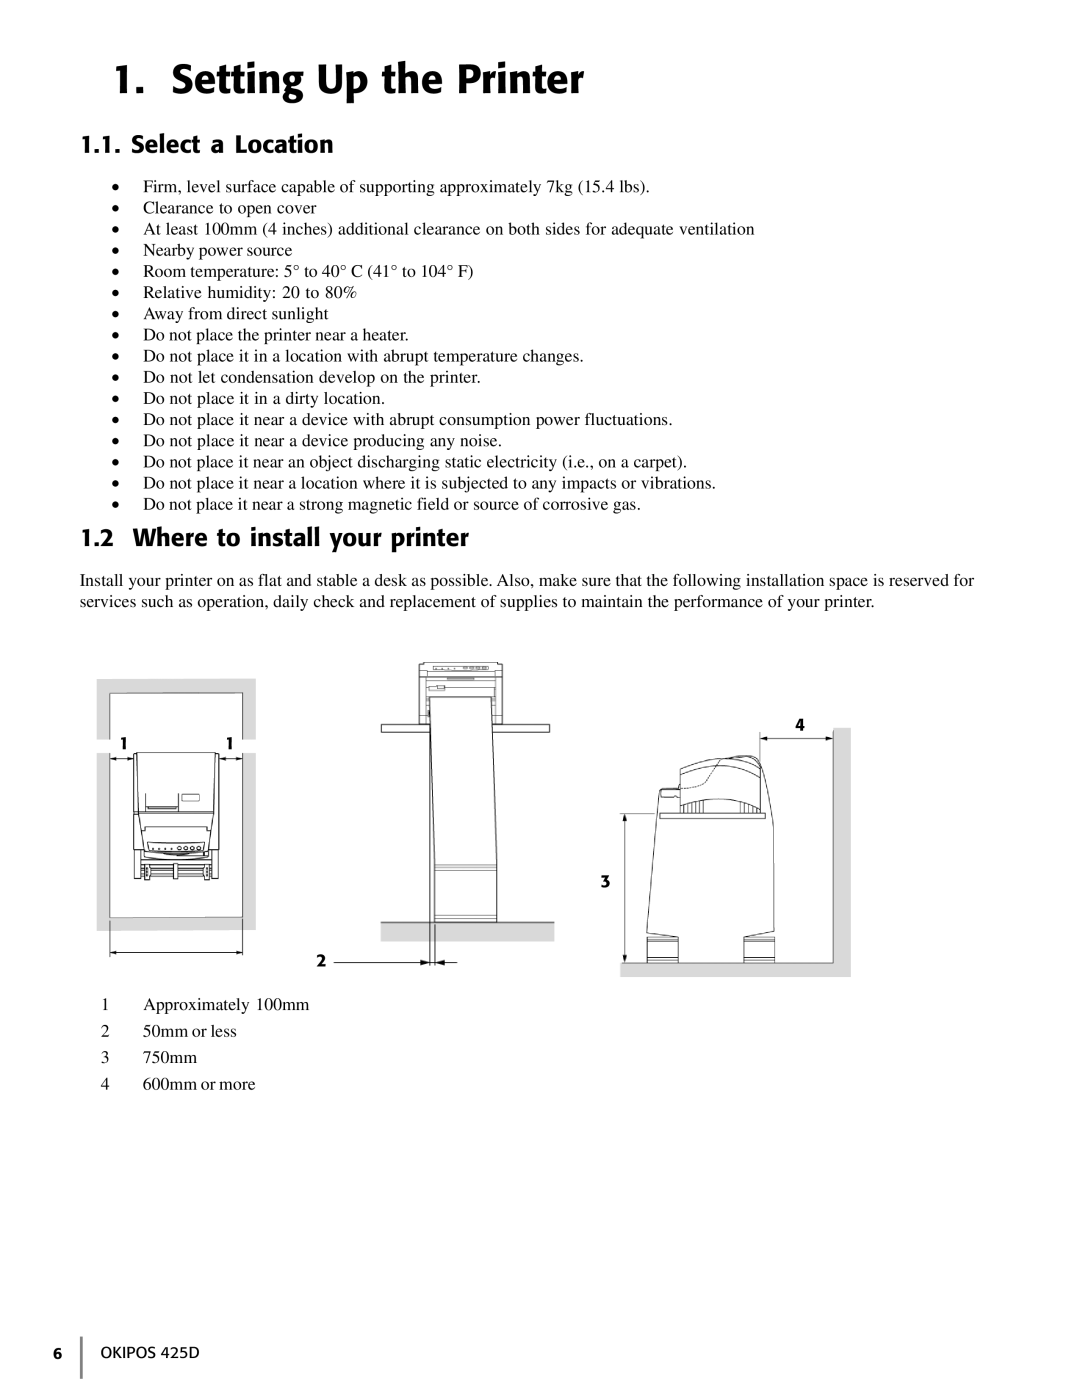 Oki 425D manual Setting Up the Printer, Select a Location, Where to install your printer 